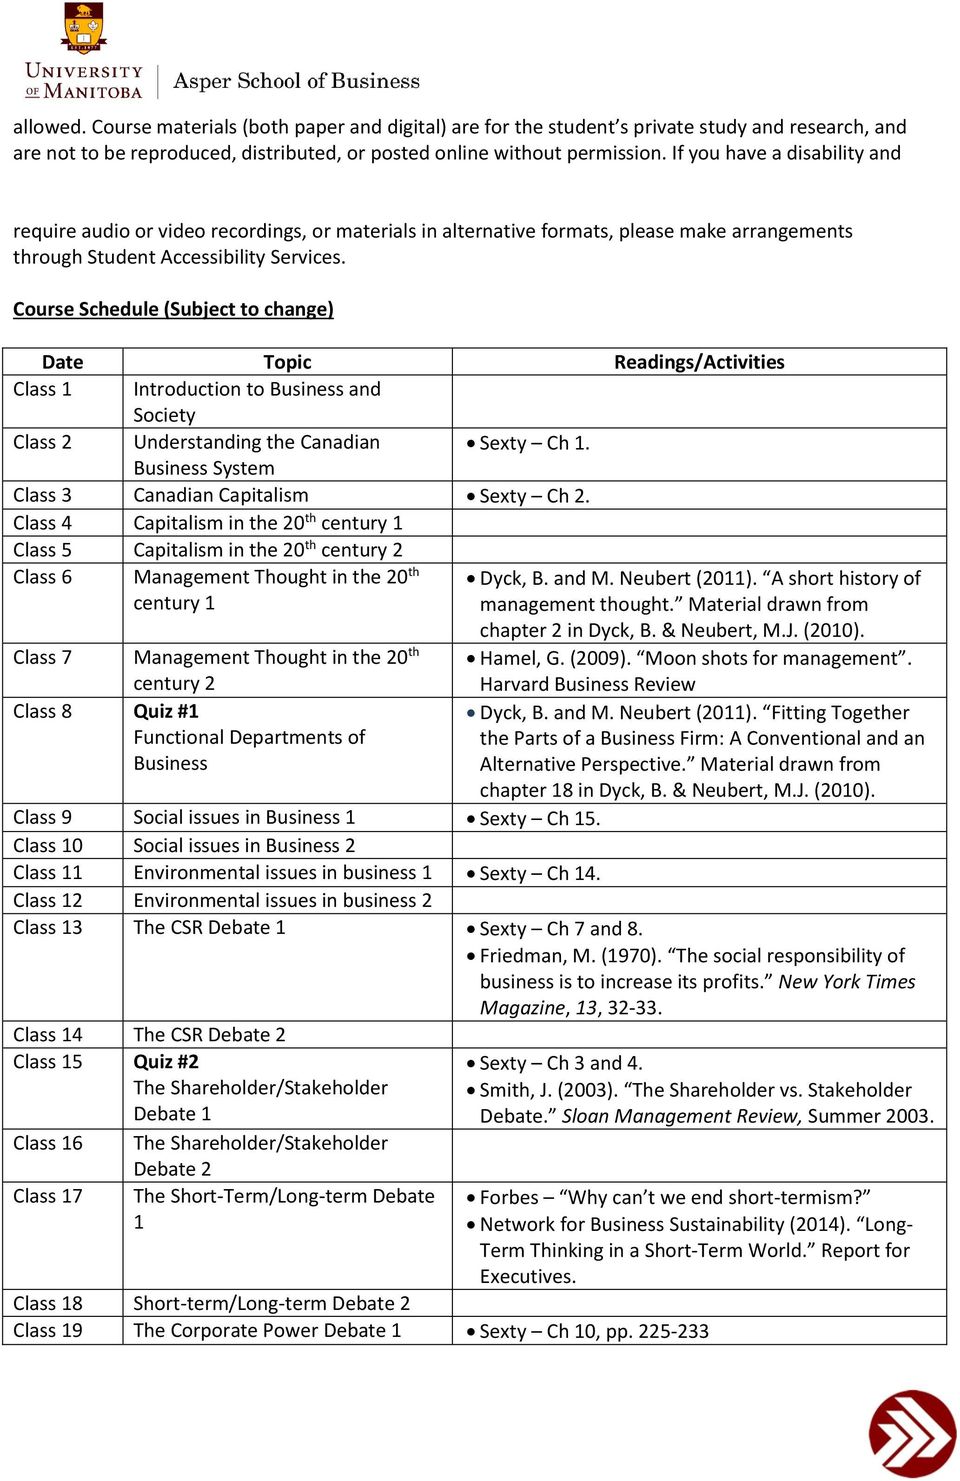 Course Schedule (Subject to change) Date Topic Readings/Activities Class 1 Introduction to Business and Society Class 2 Understanding the Canadian Sexty Ch 1.